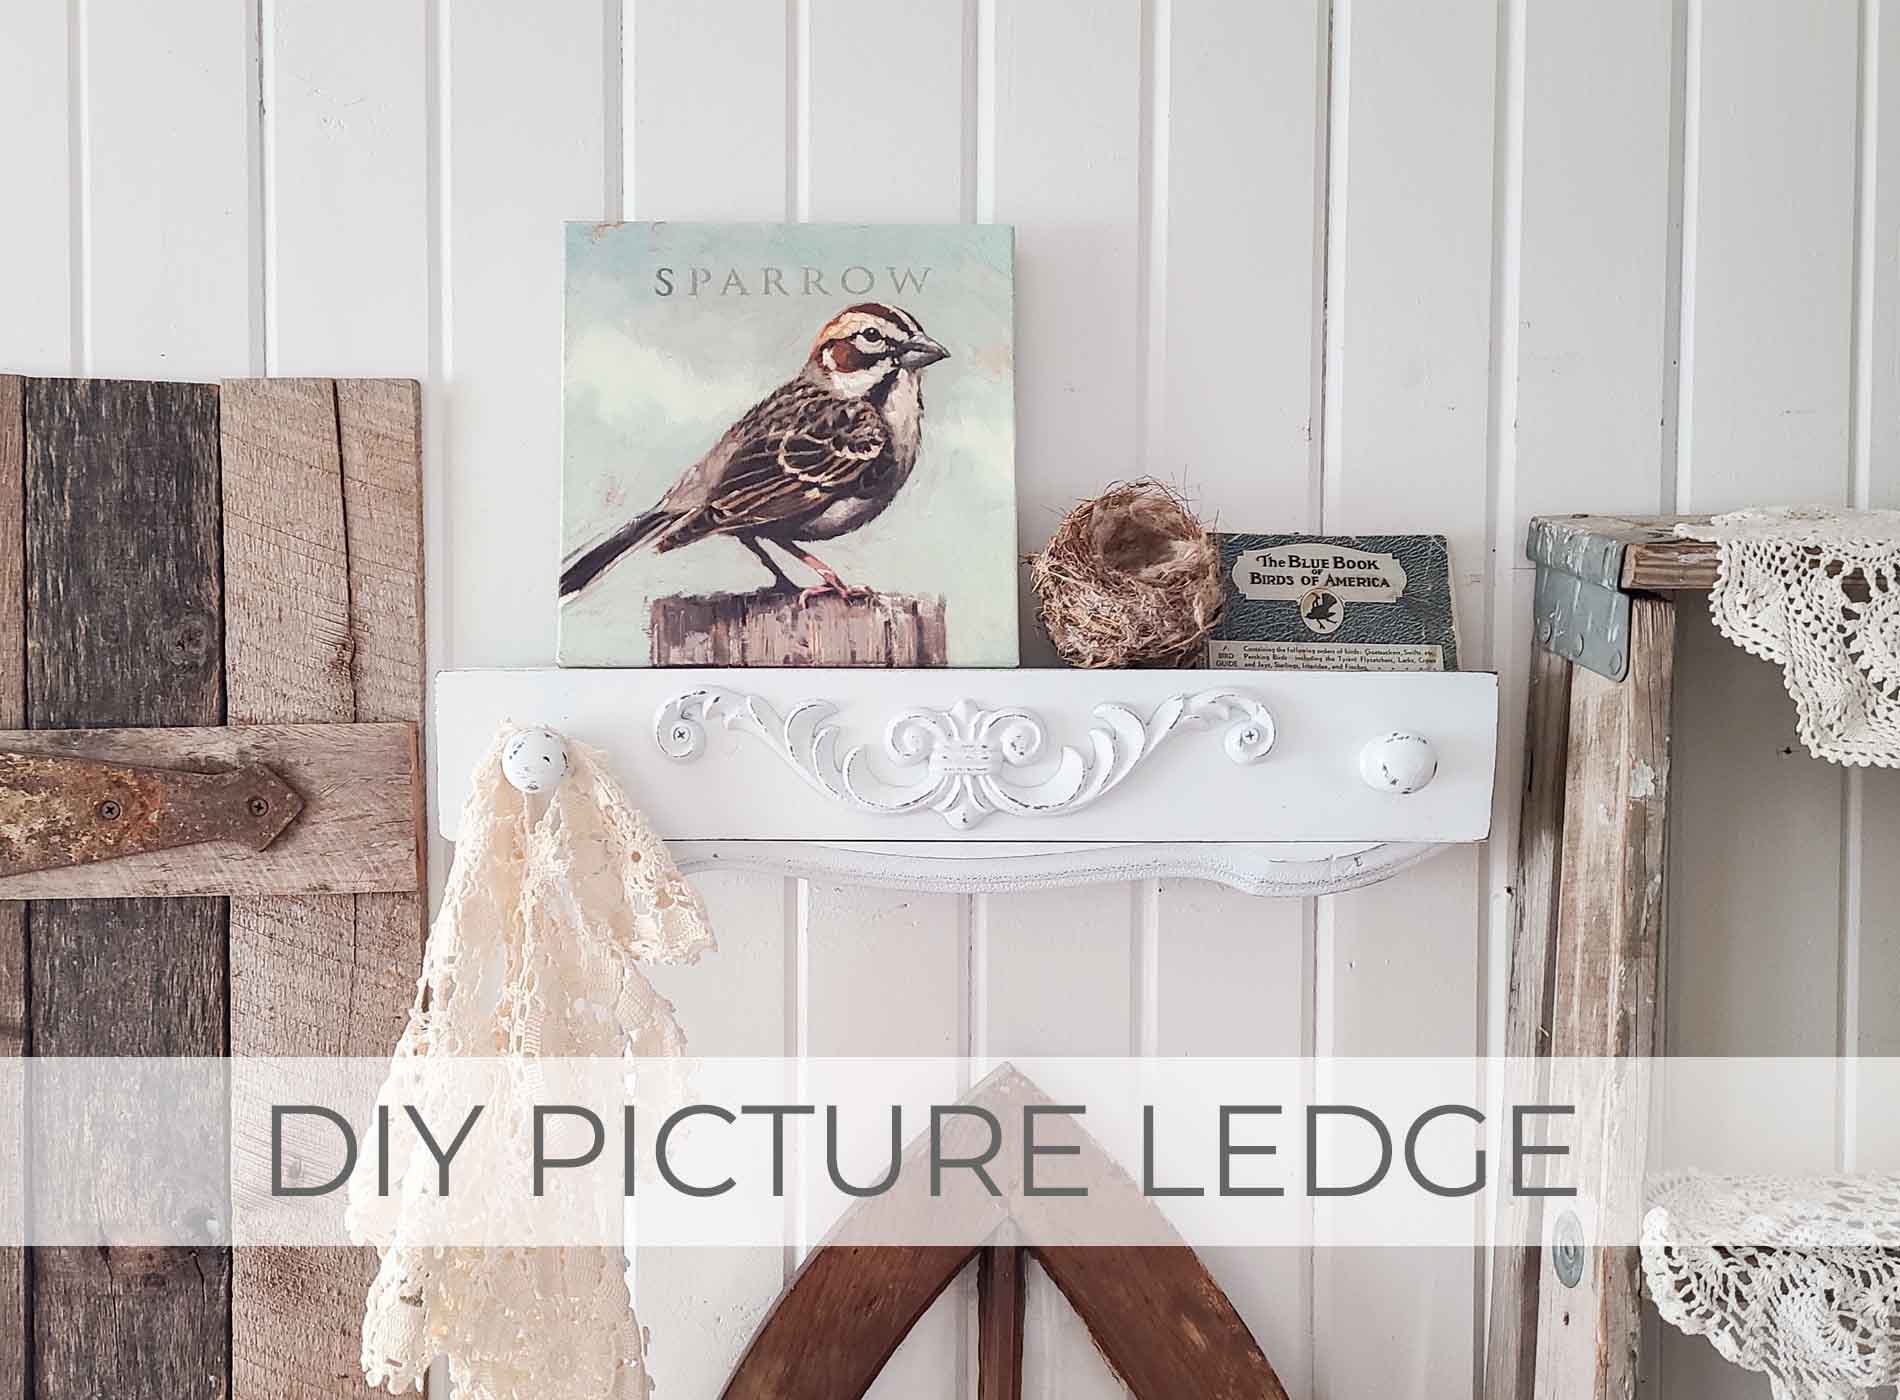 Showcase of DIY Picture Ledge from Thrifted Finds by Larissa of Prodigal Pieces | prodigalpieces.com #prodigalpieces